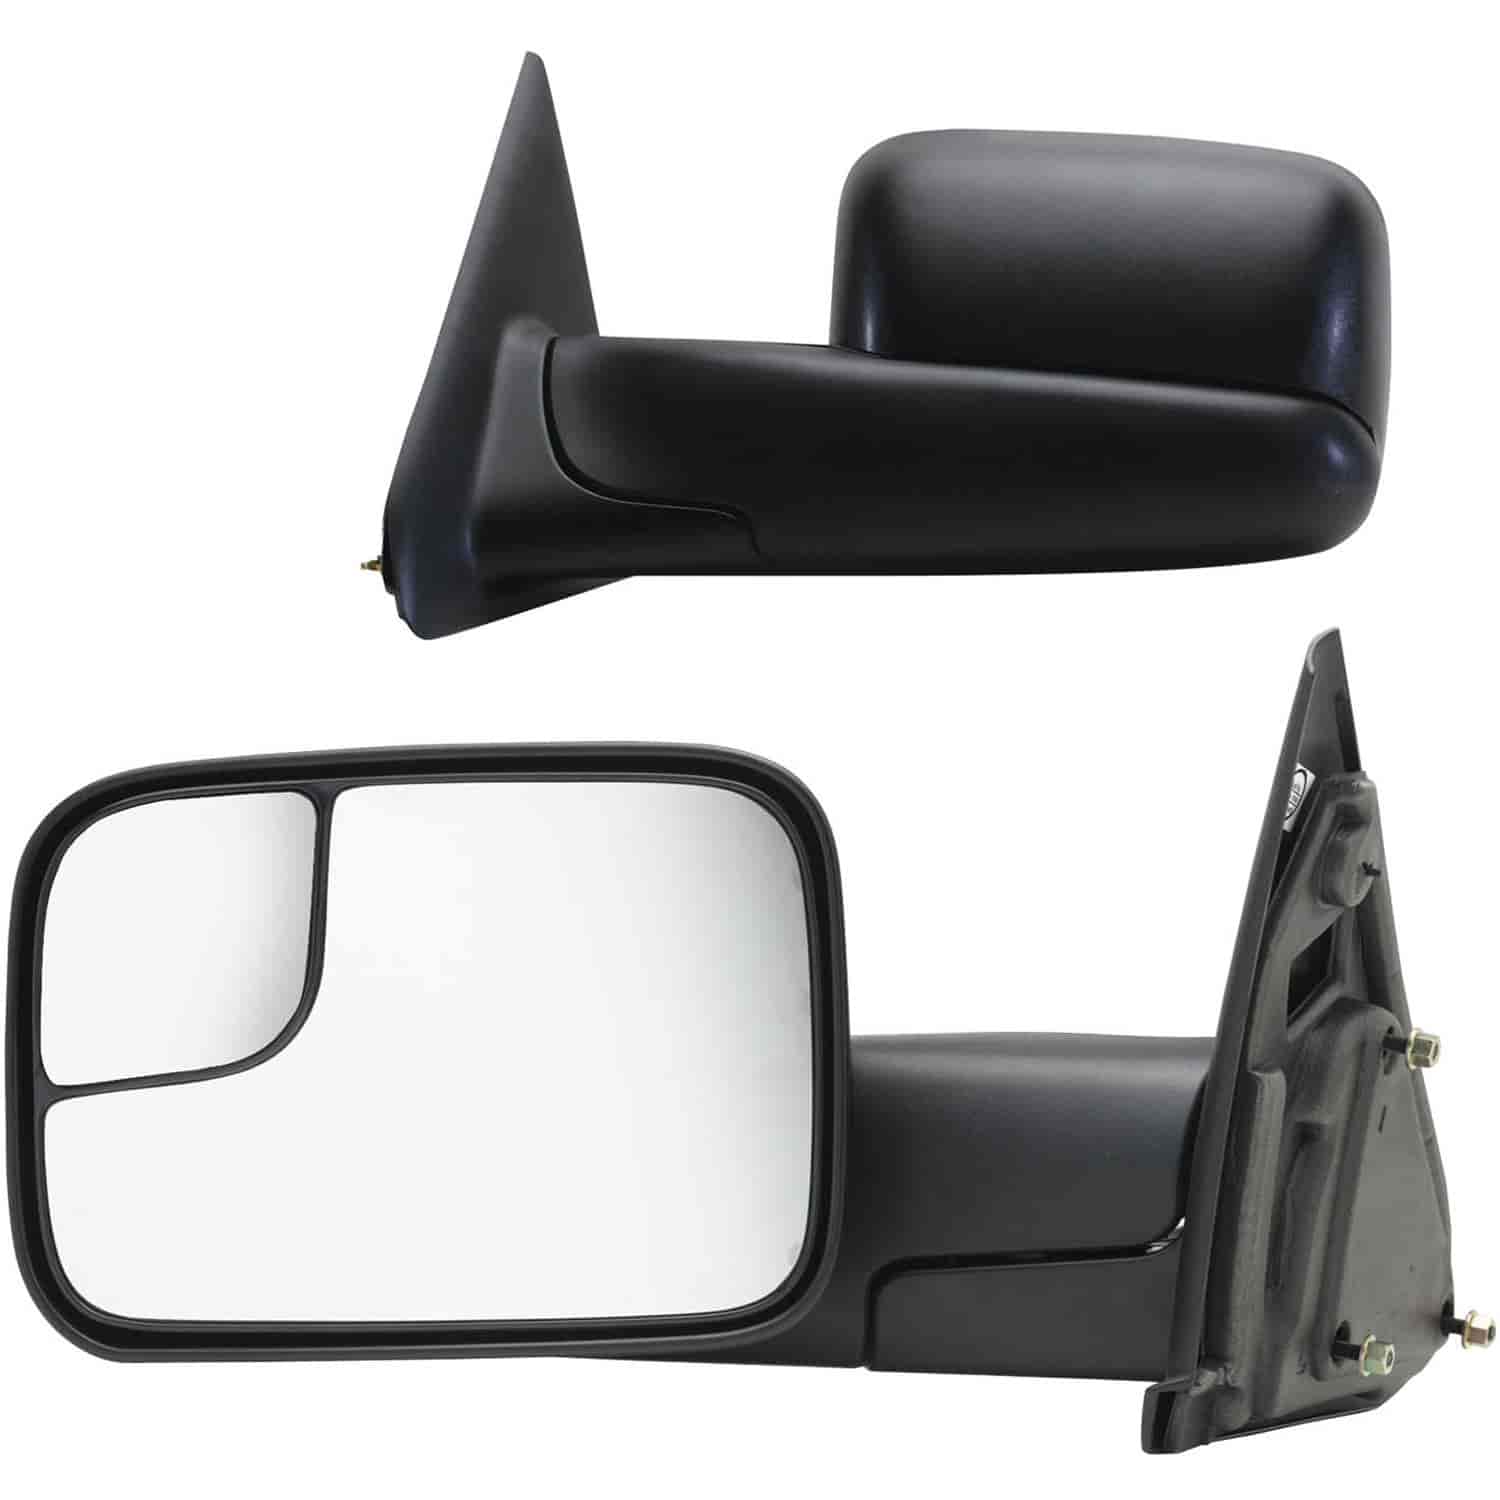 OEM Style Replacement mirror set for 02-08 1500